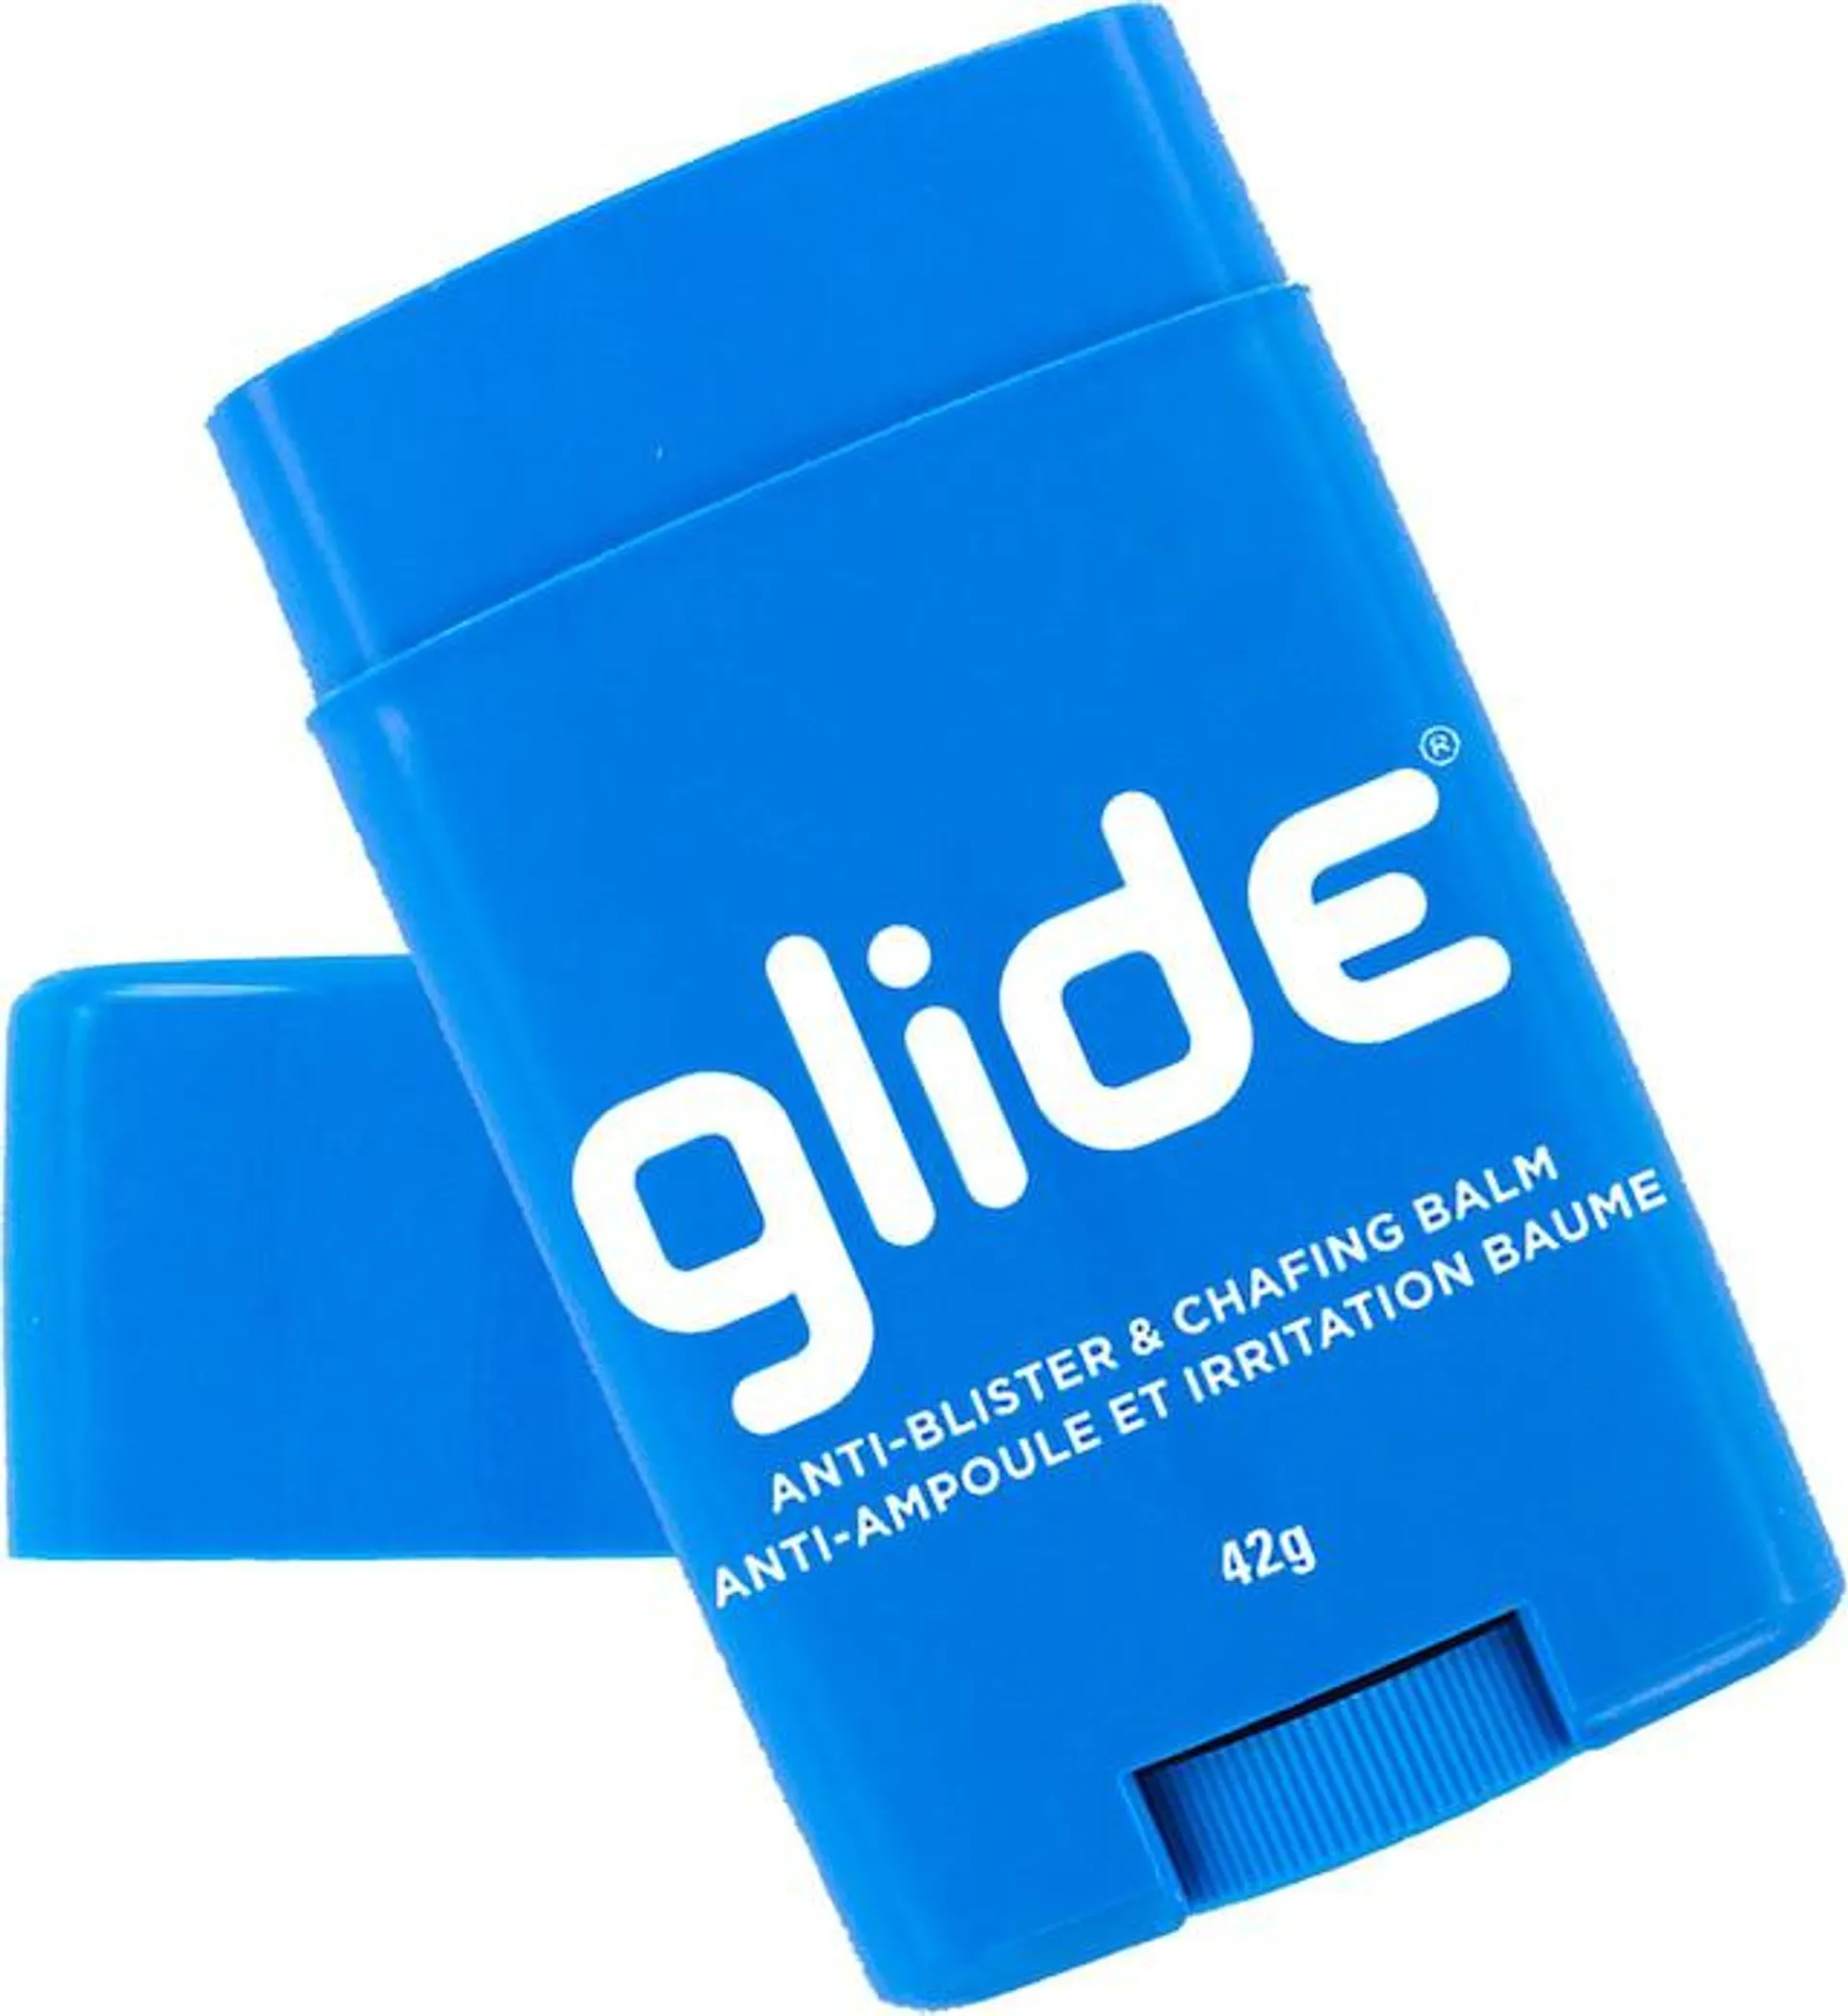 Body Glide Anti-Blister and Anti-Chafing Balm - 42g